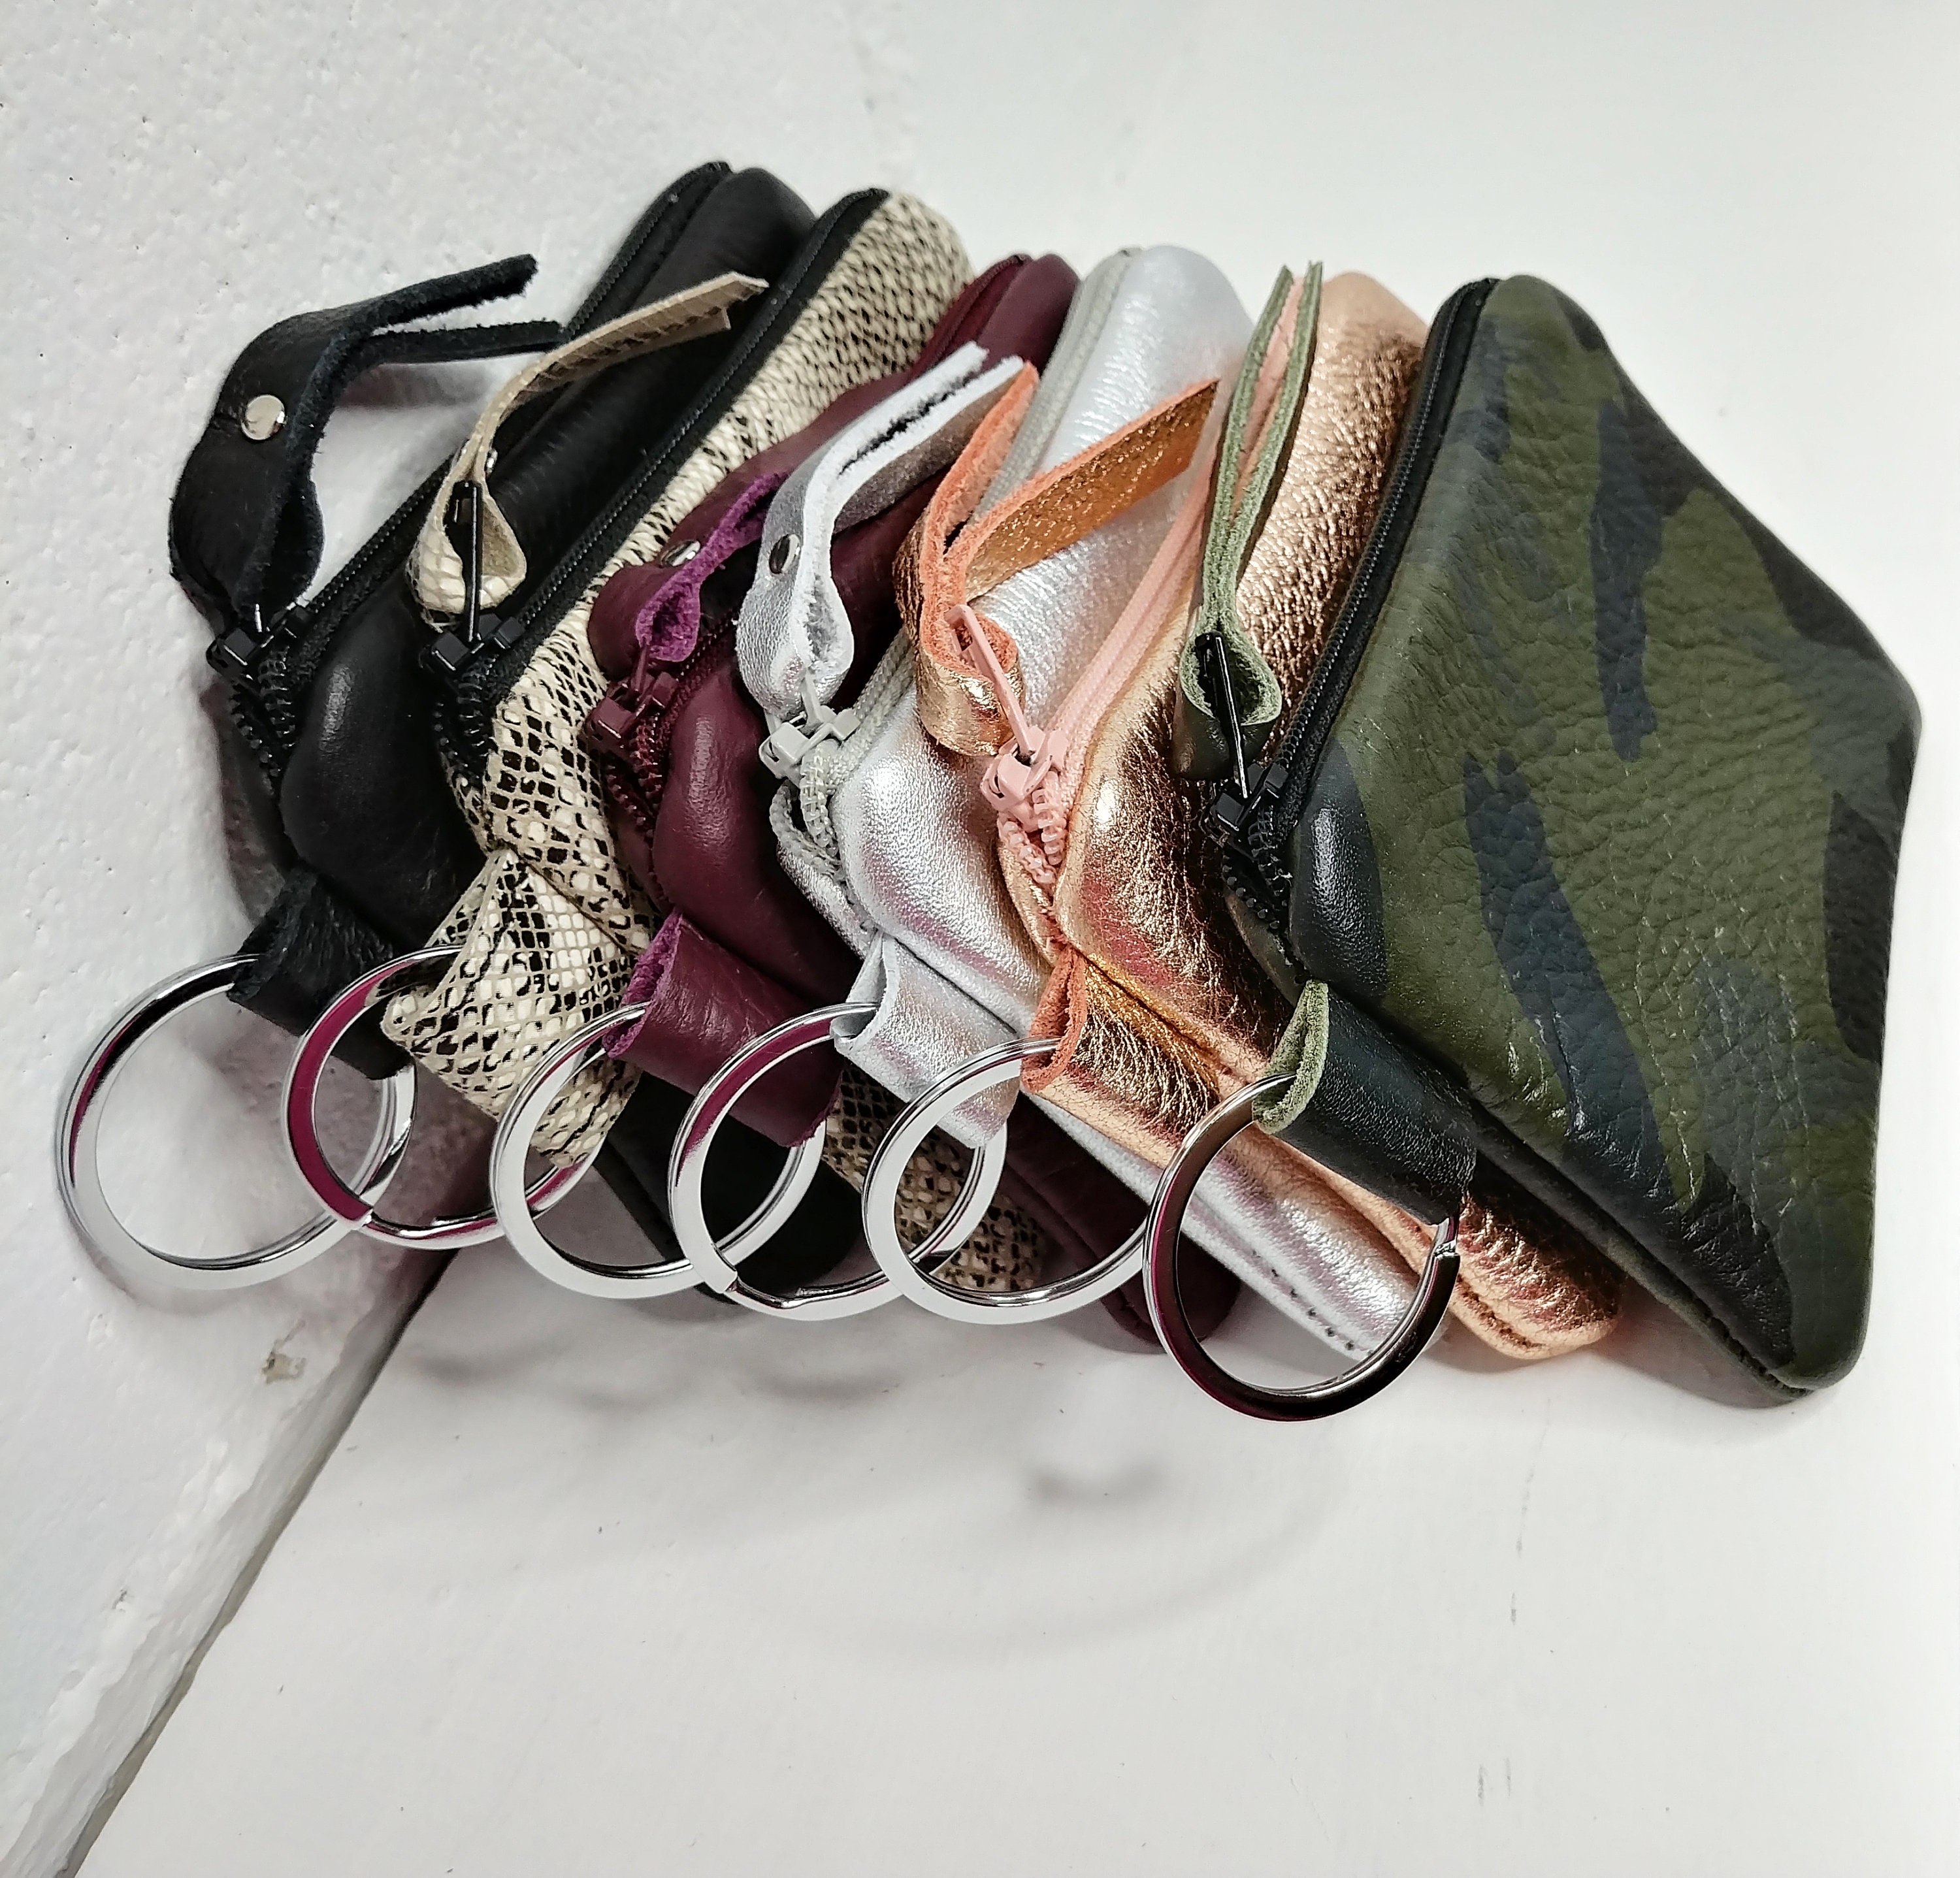 Metallic Leather Keychain Wallet in 7 Colors in 2 Sizes Card 